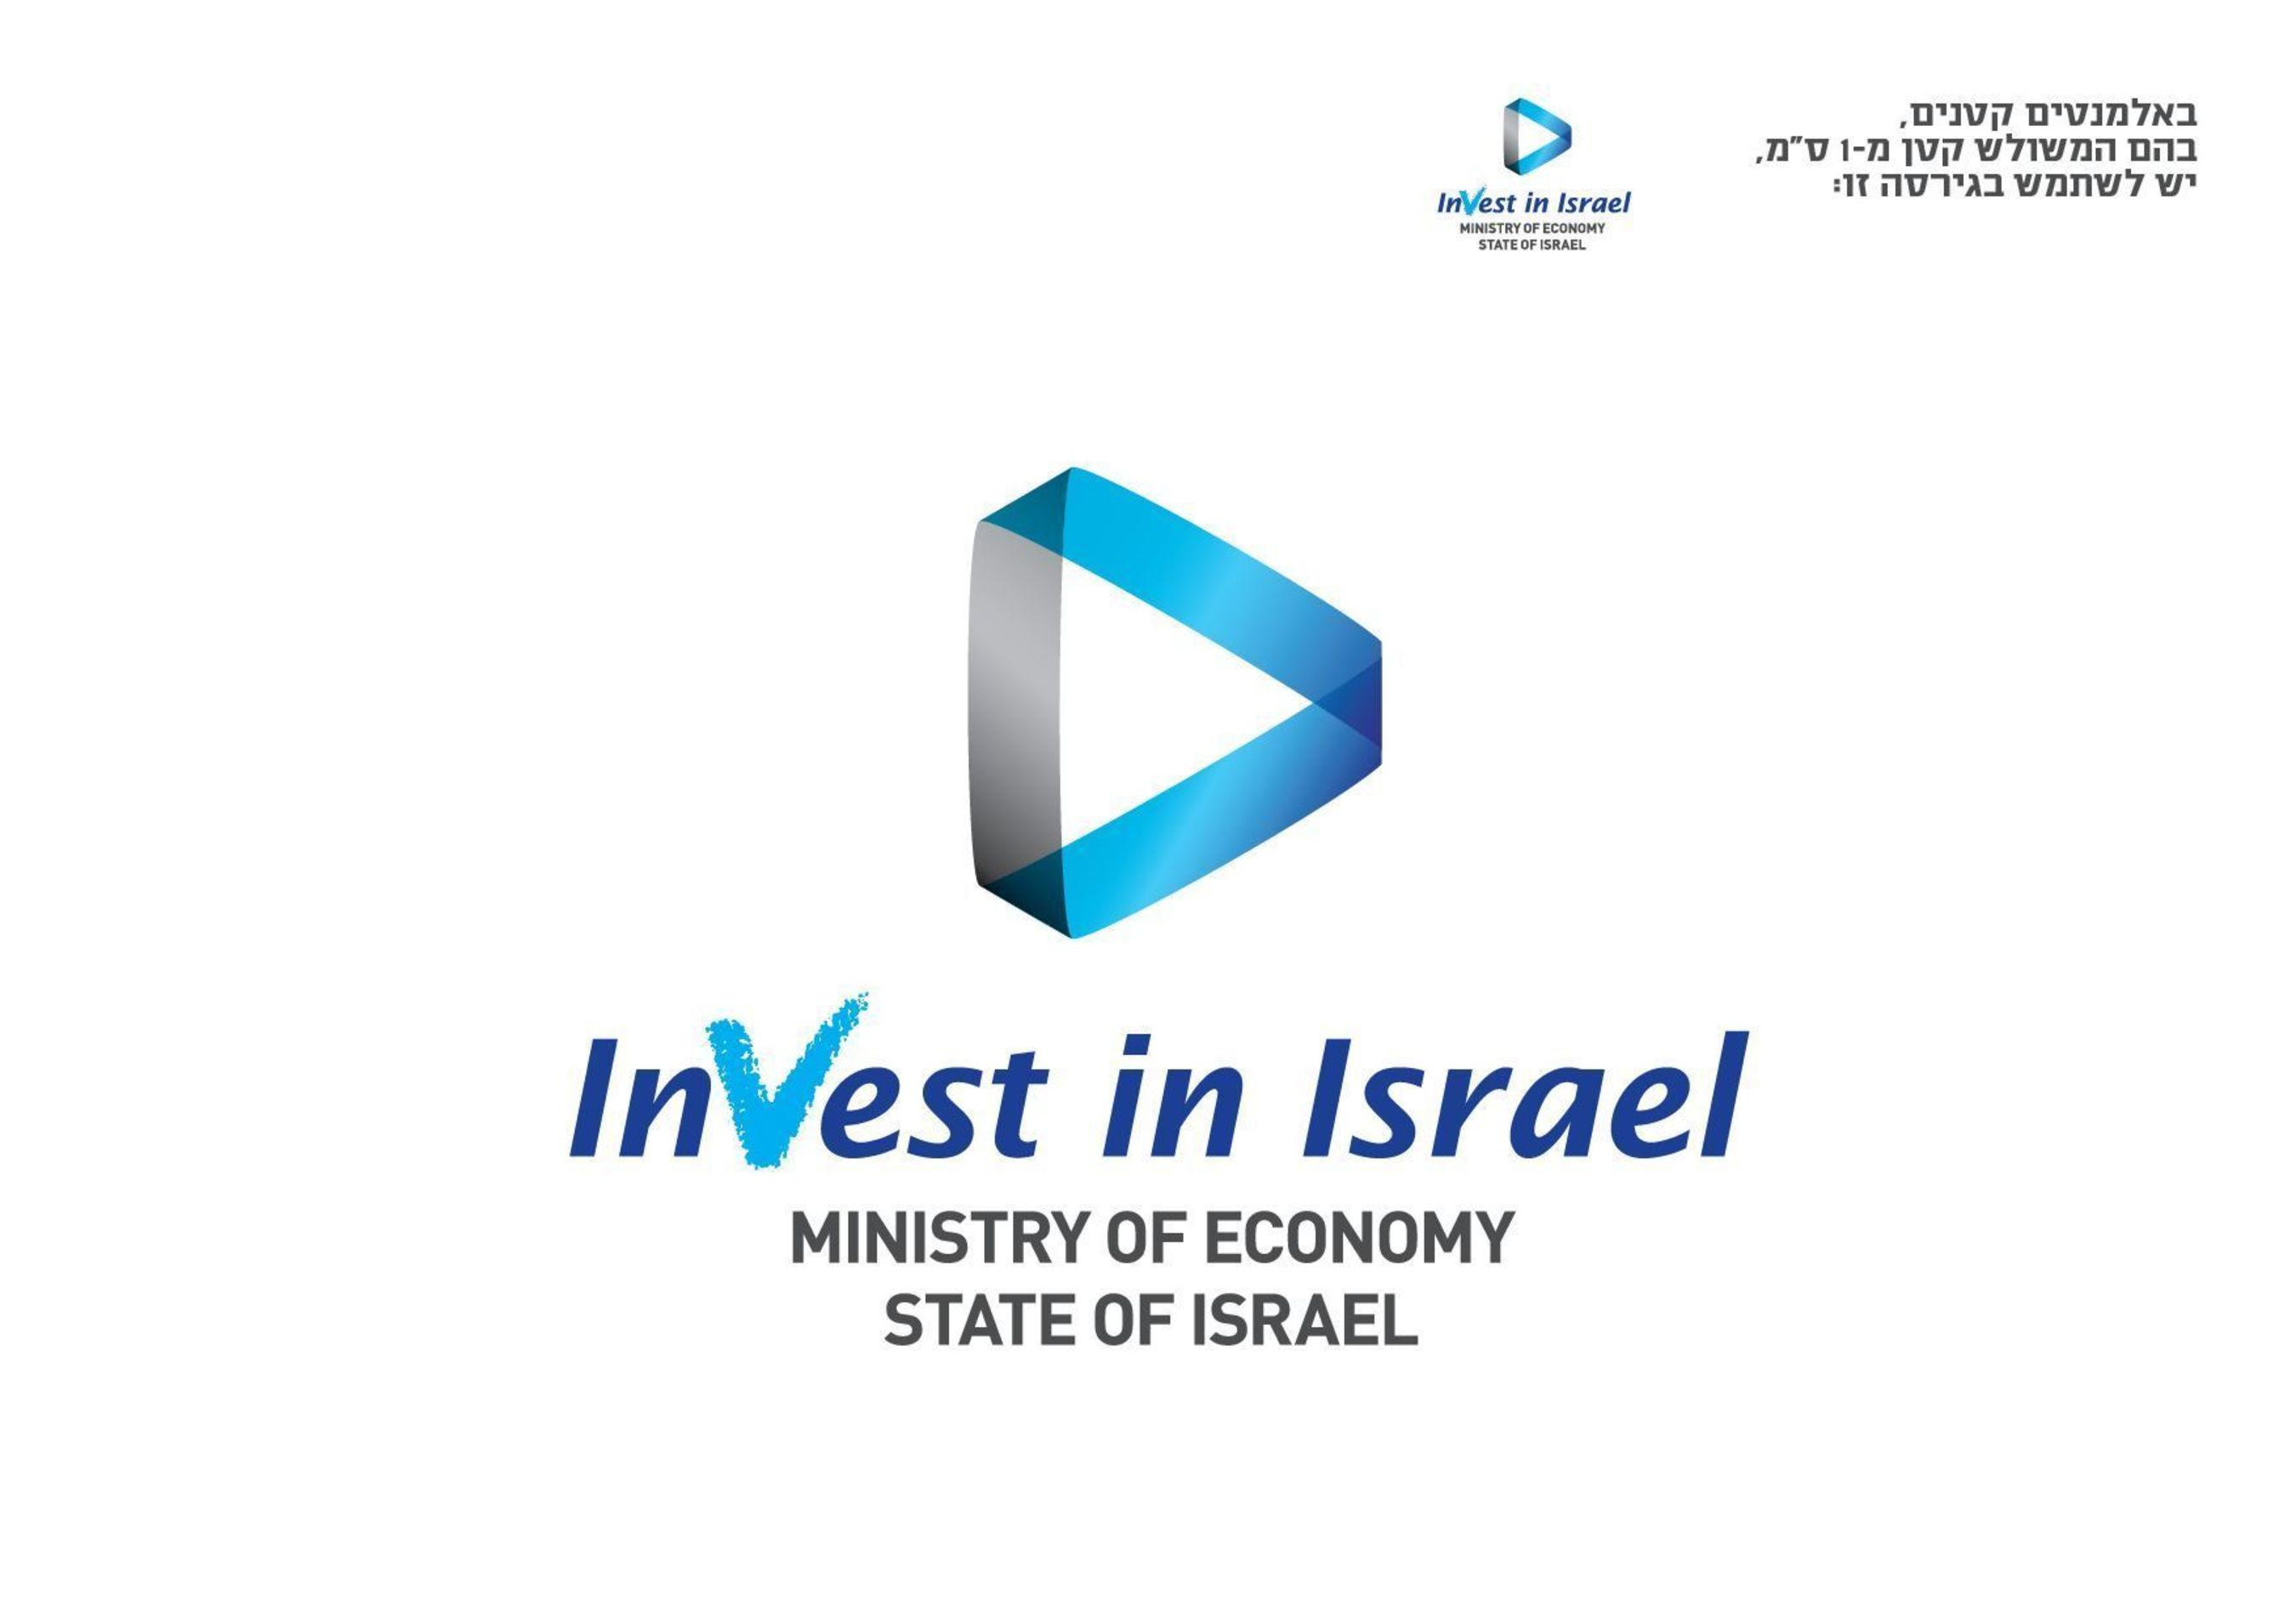 Invest in Israel MINISTRY OF ECONOMY STATE OF ISRAEL Logo (PRNewsFoto/AgriVest)